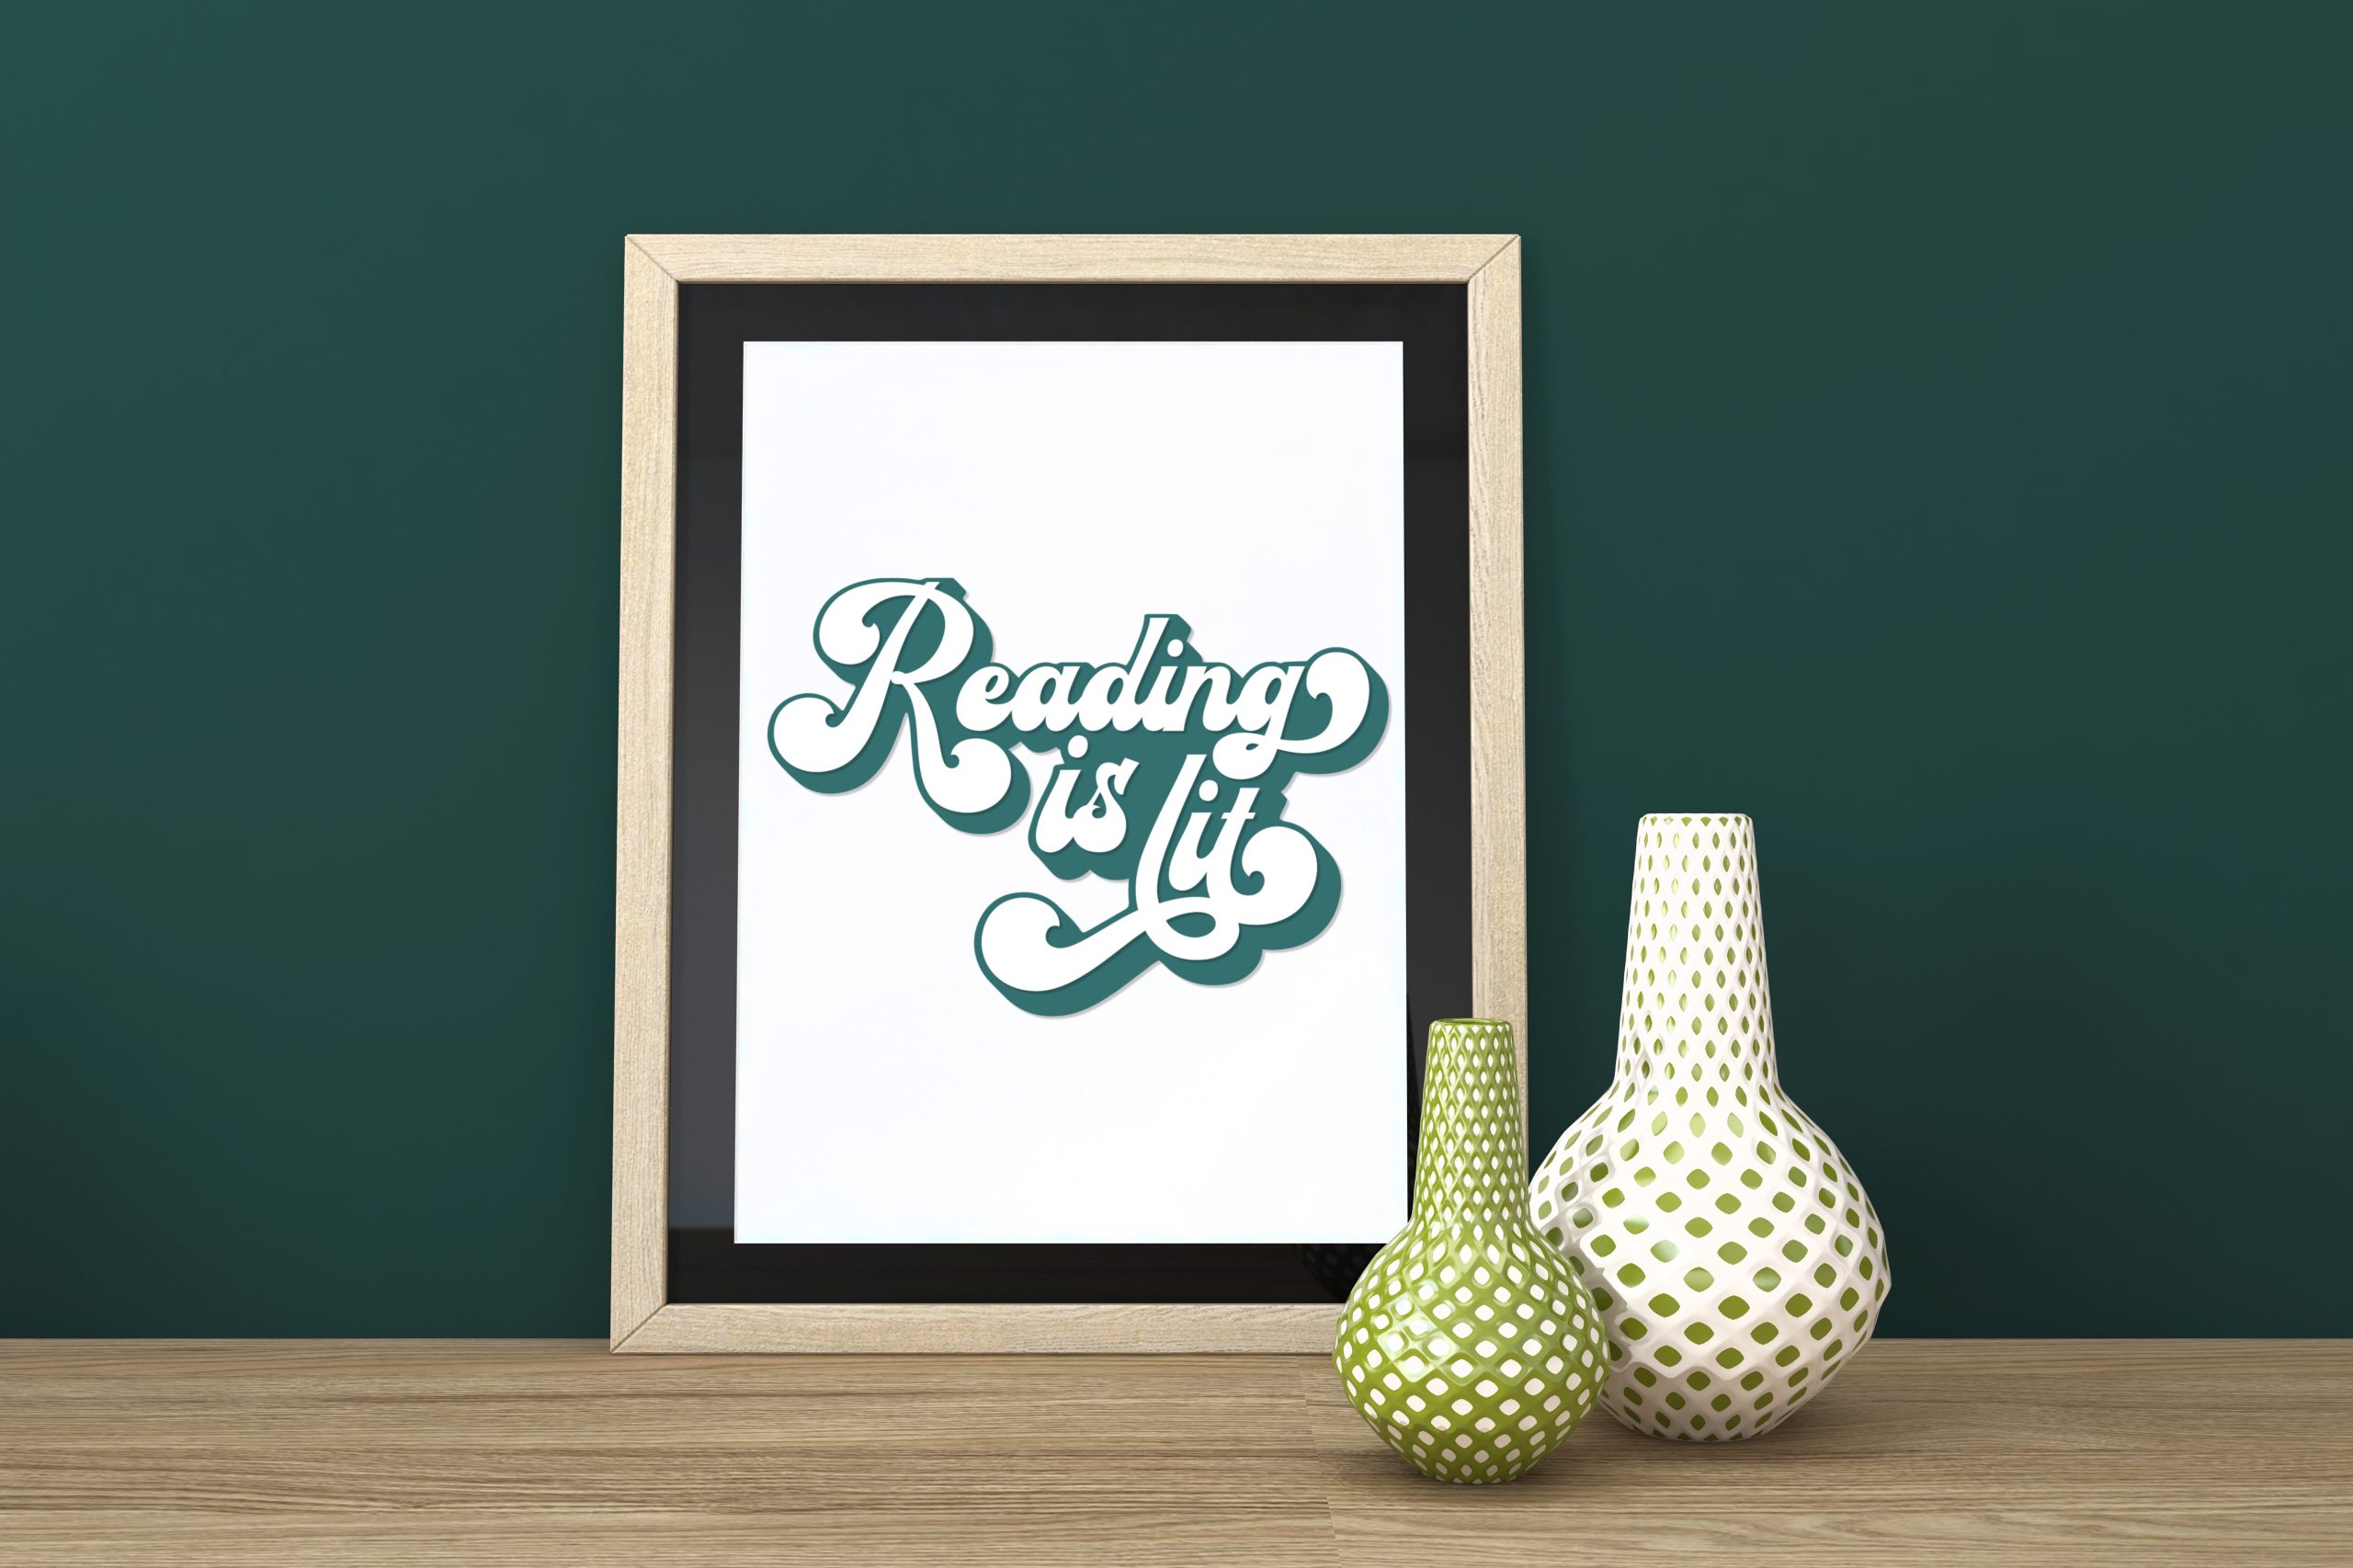 Framed Reading is Lit papercut design on a table near green vases